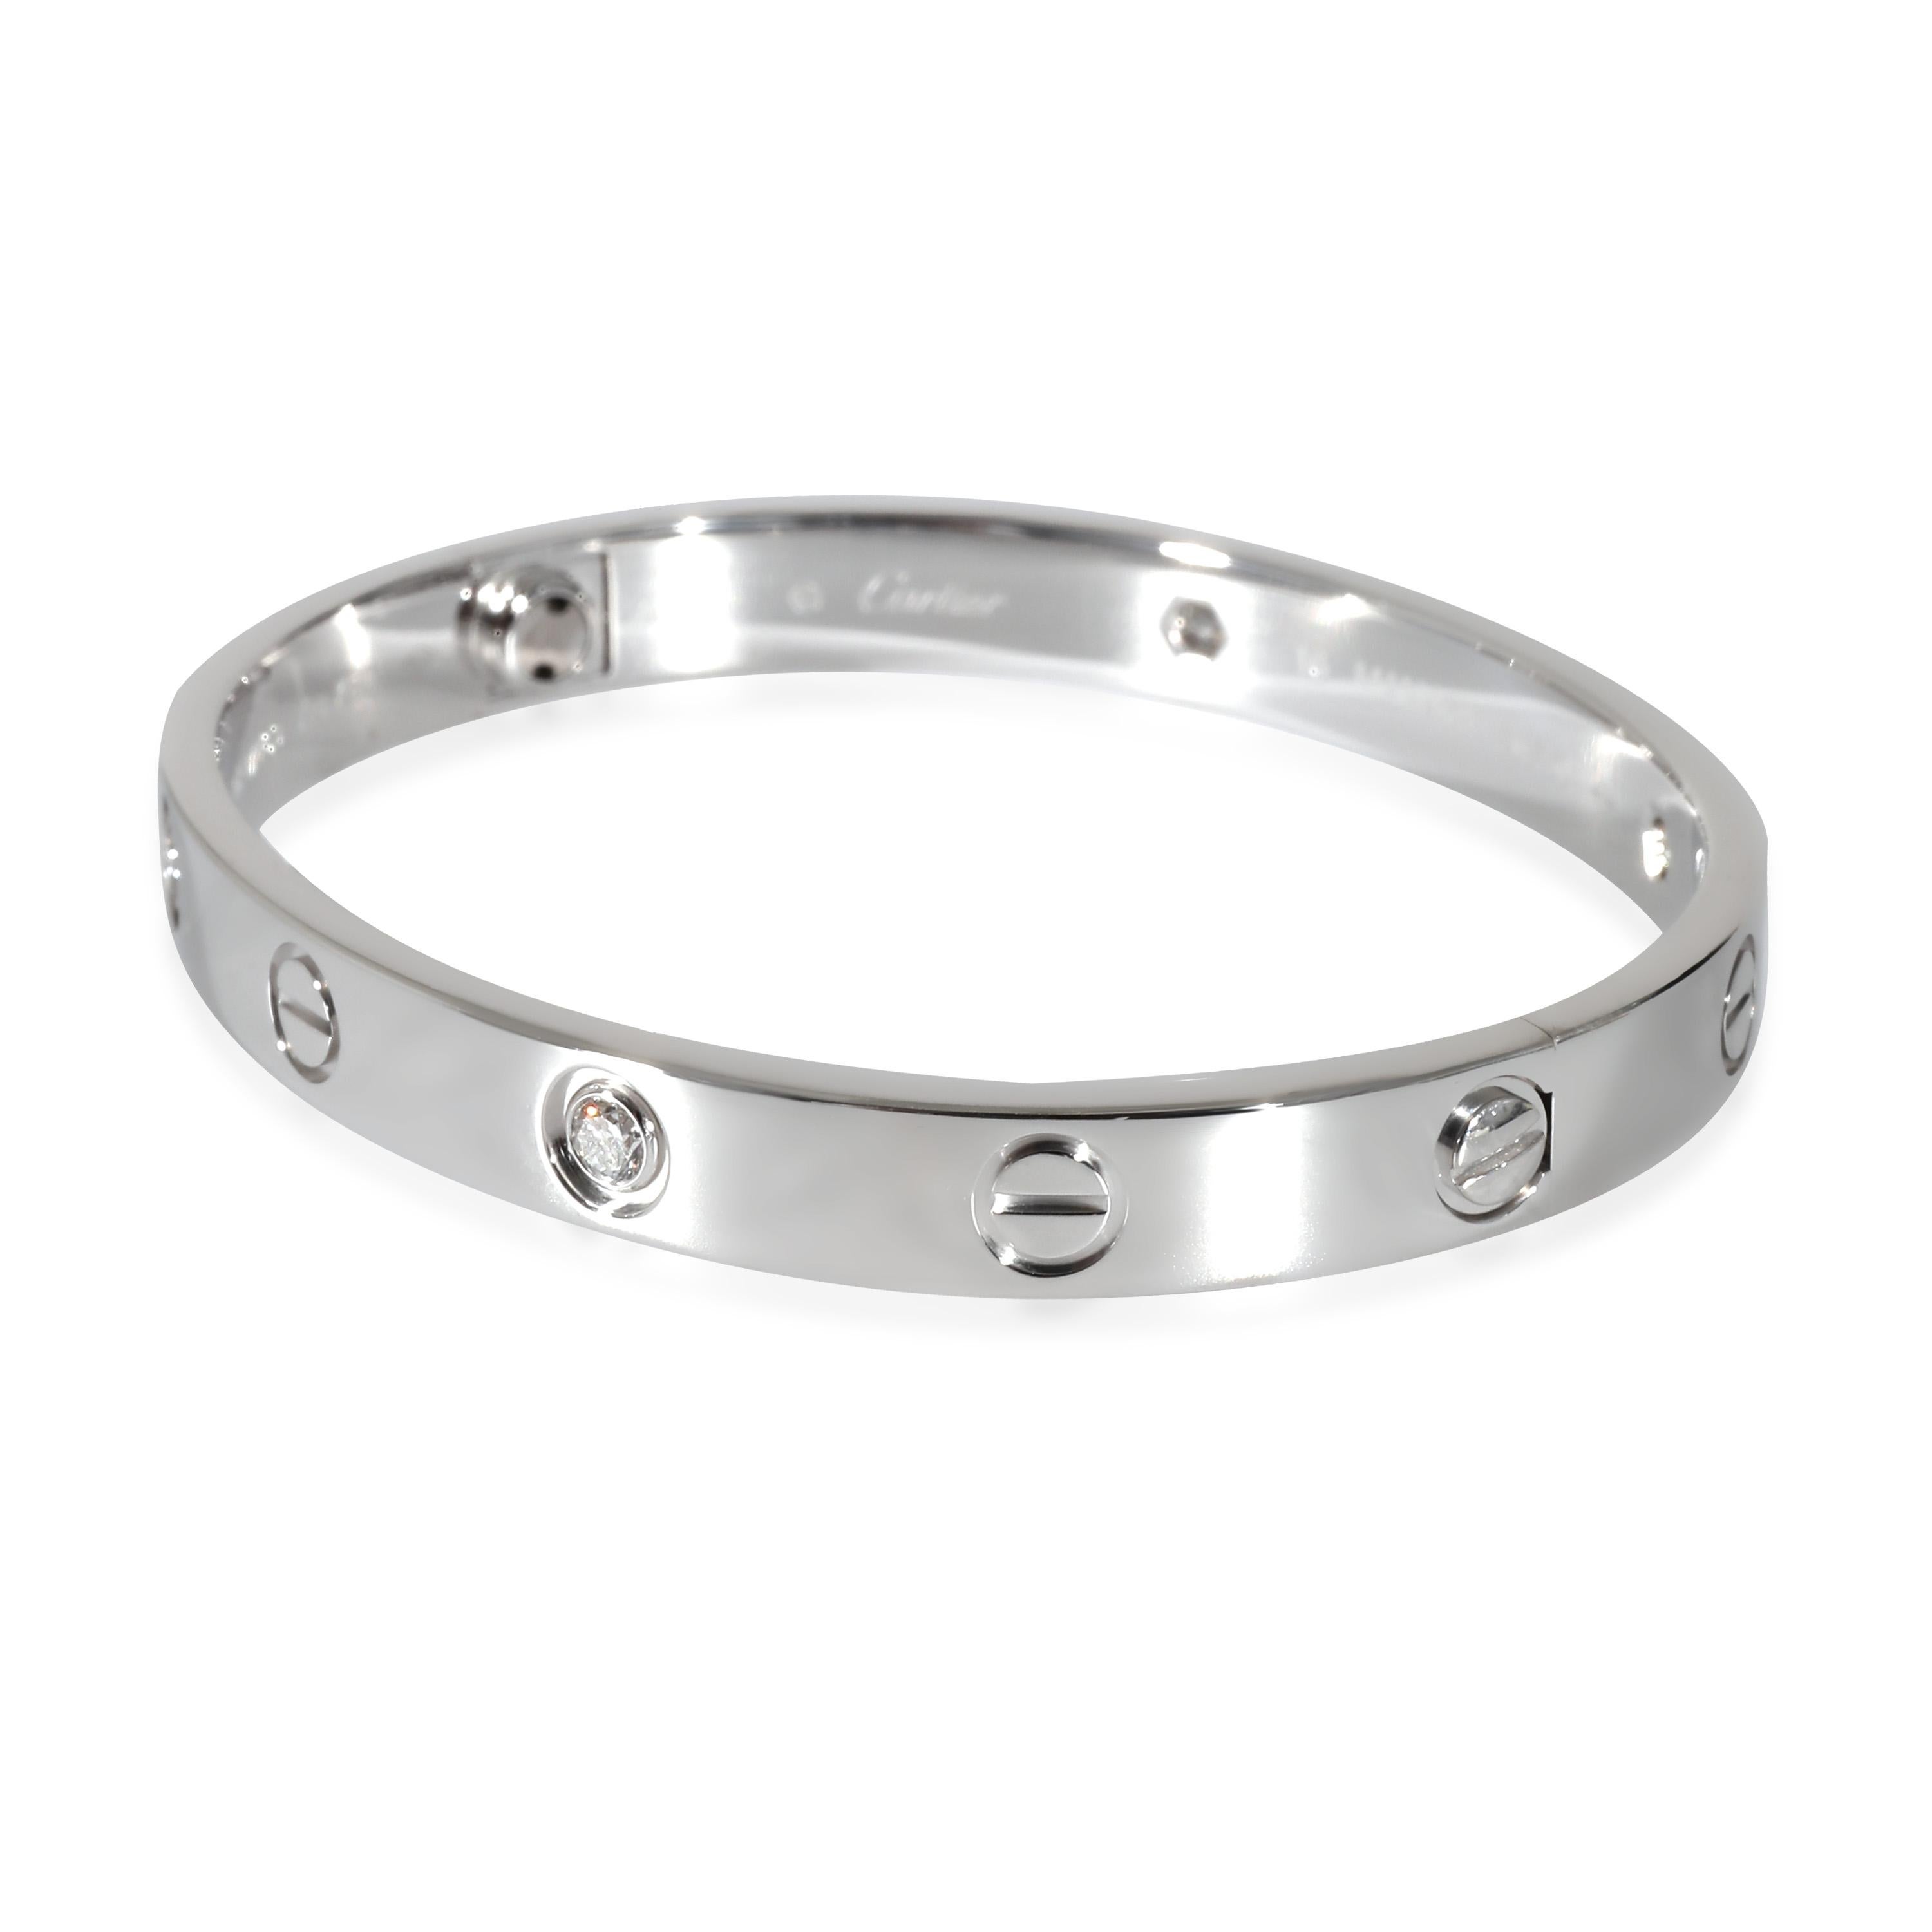 Cartier Love Bracelet in 18K White Gold 0.42 CTW In Excellent Condition For Sale In New York, NY